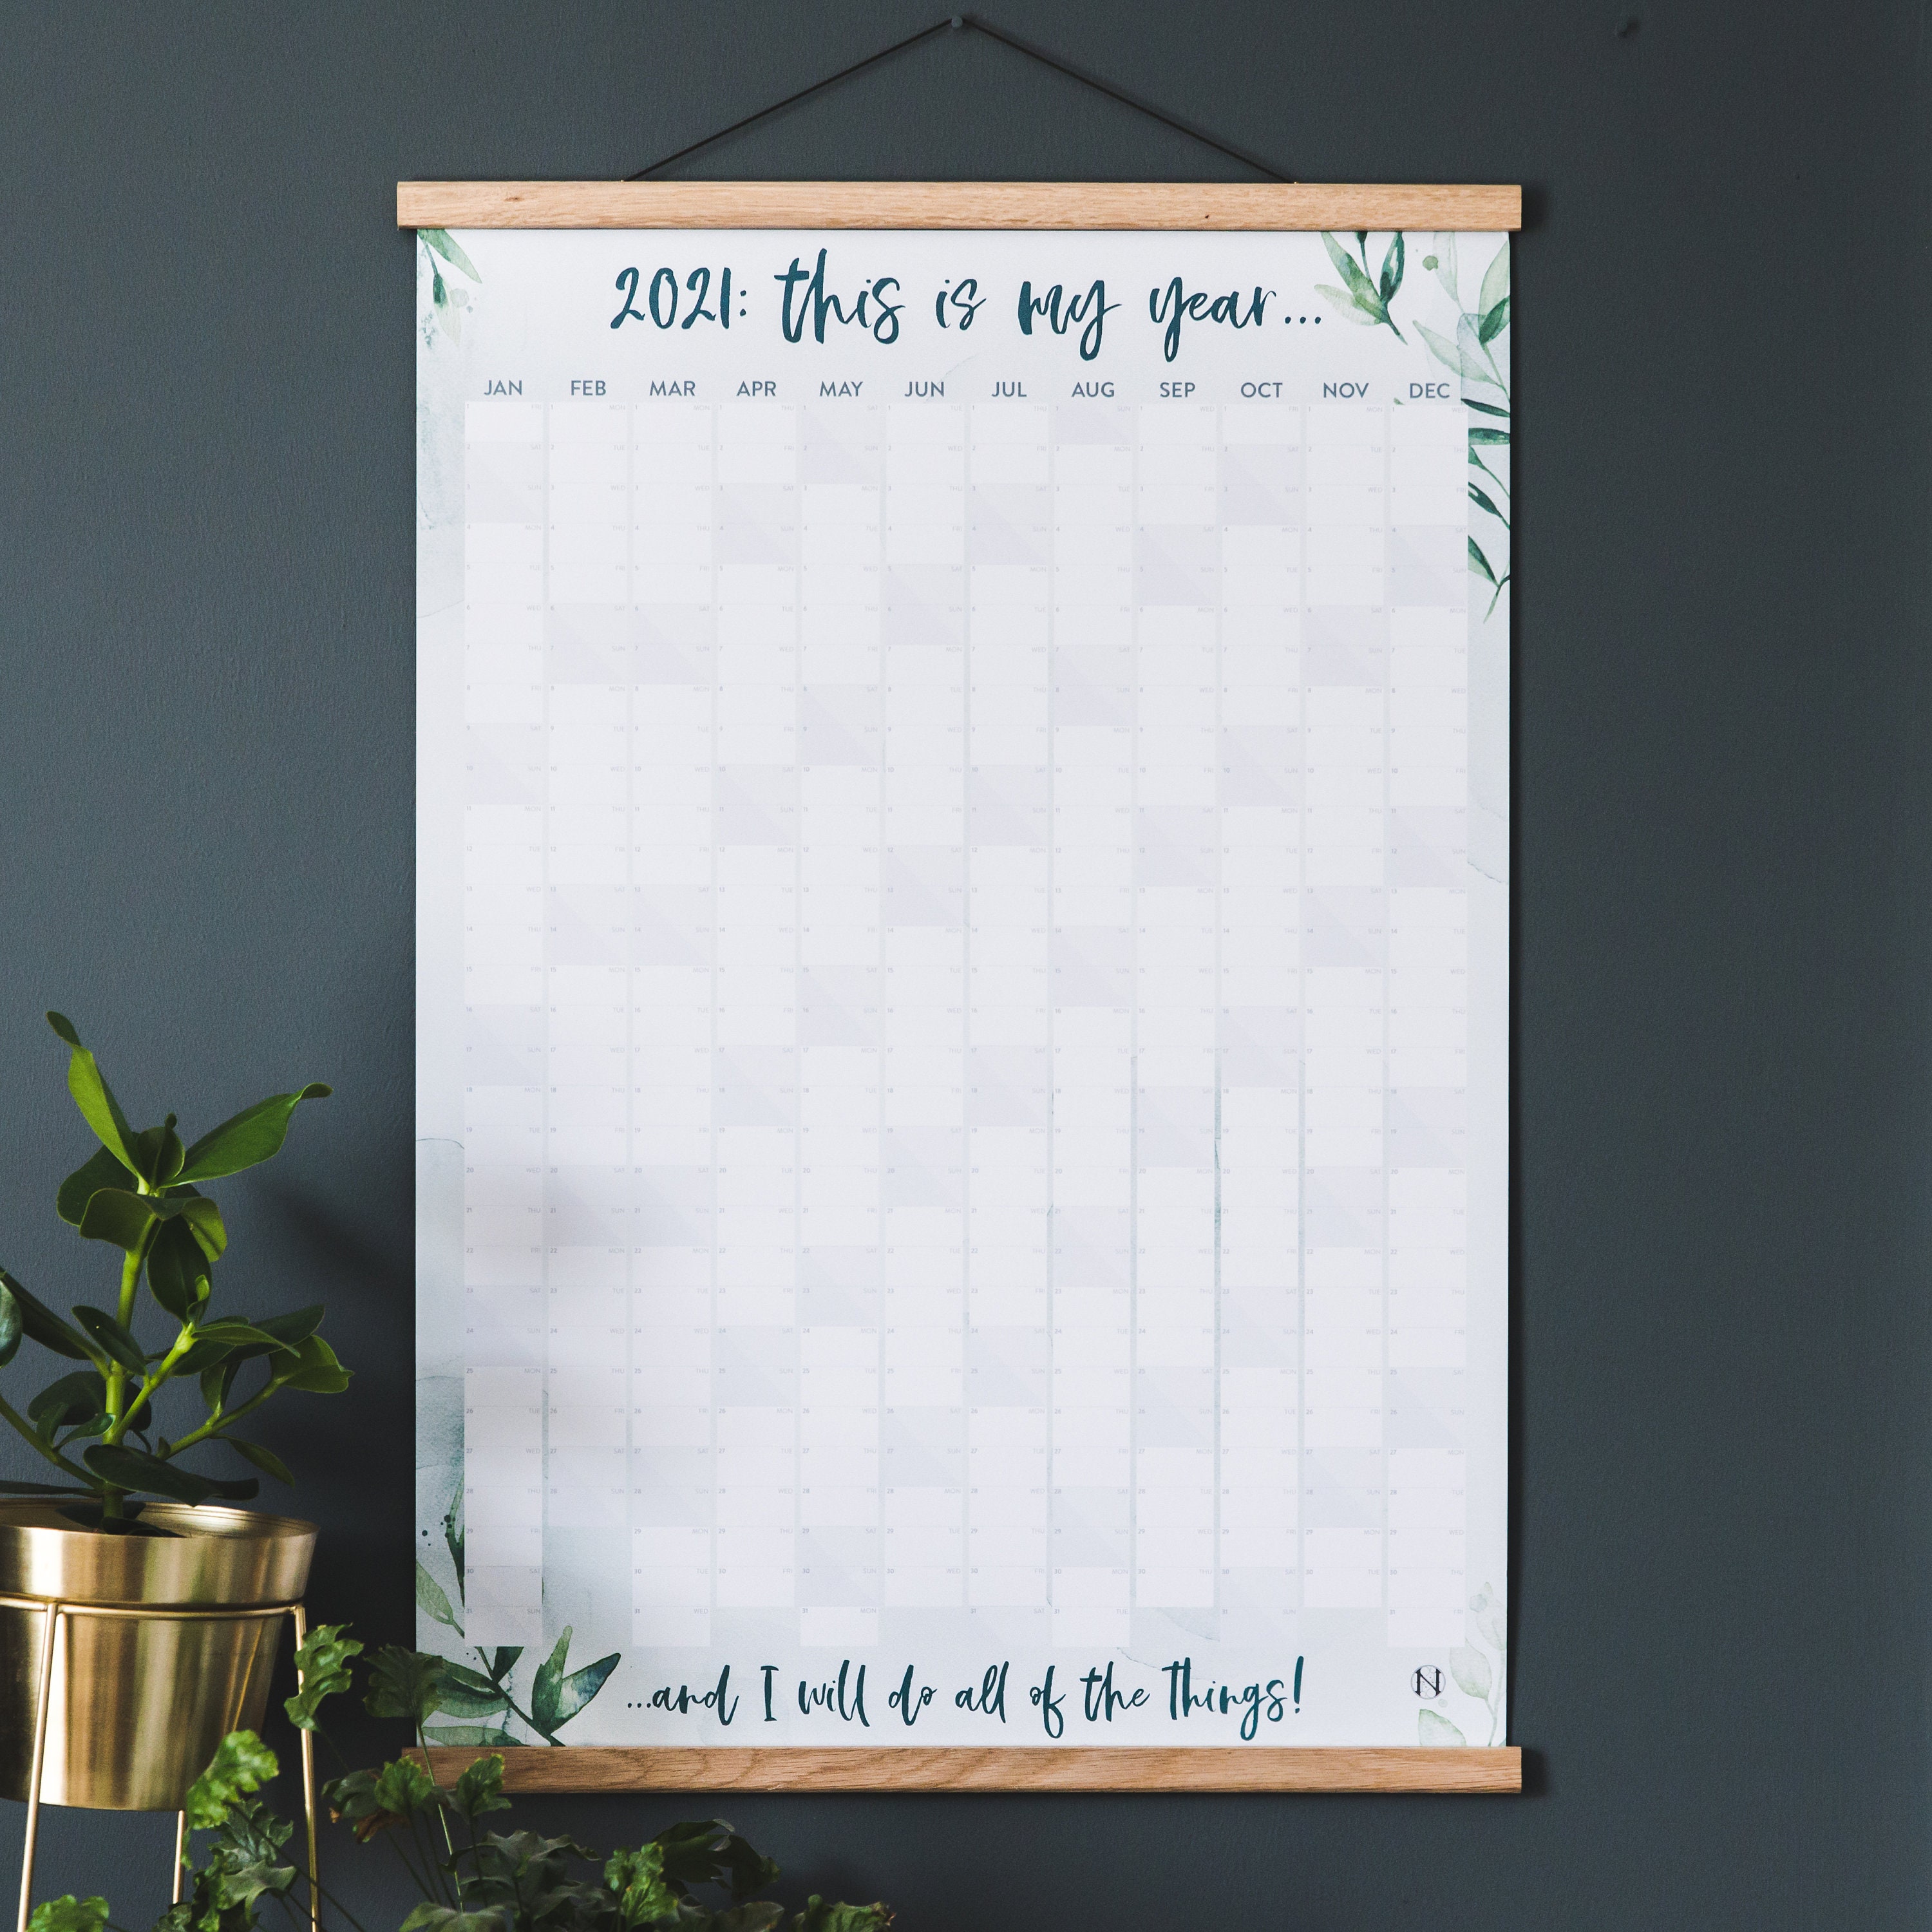 2021 Wall Planner Wall Calendar 2021 This Is My Year Etsy